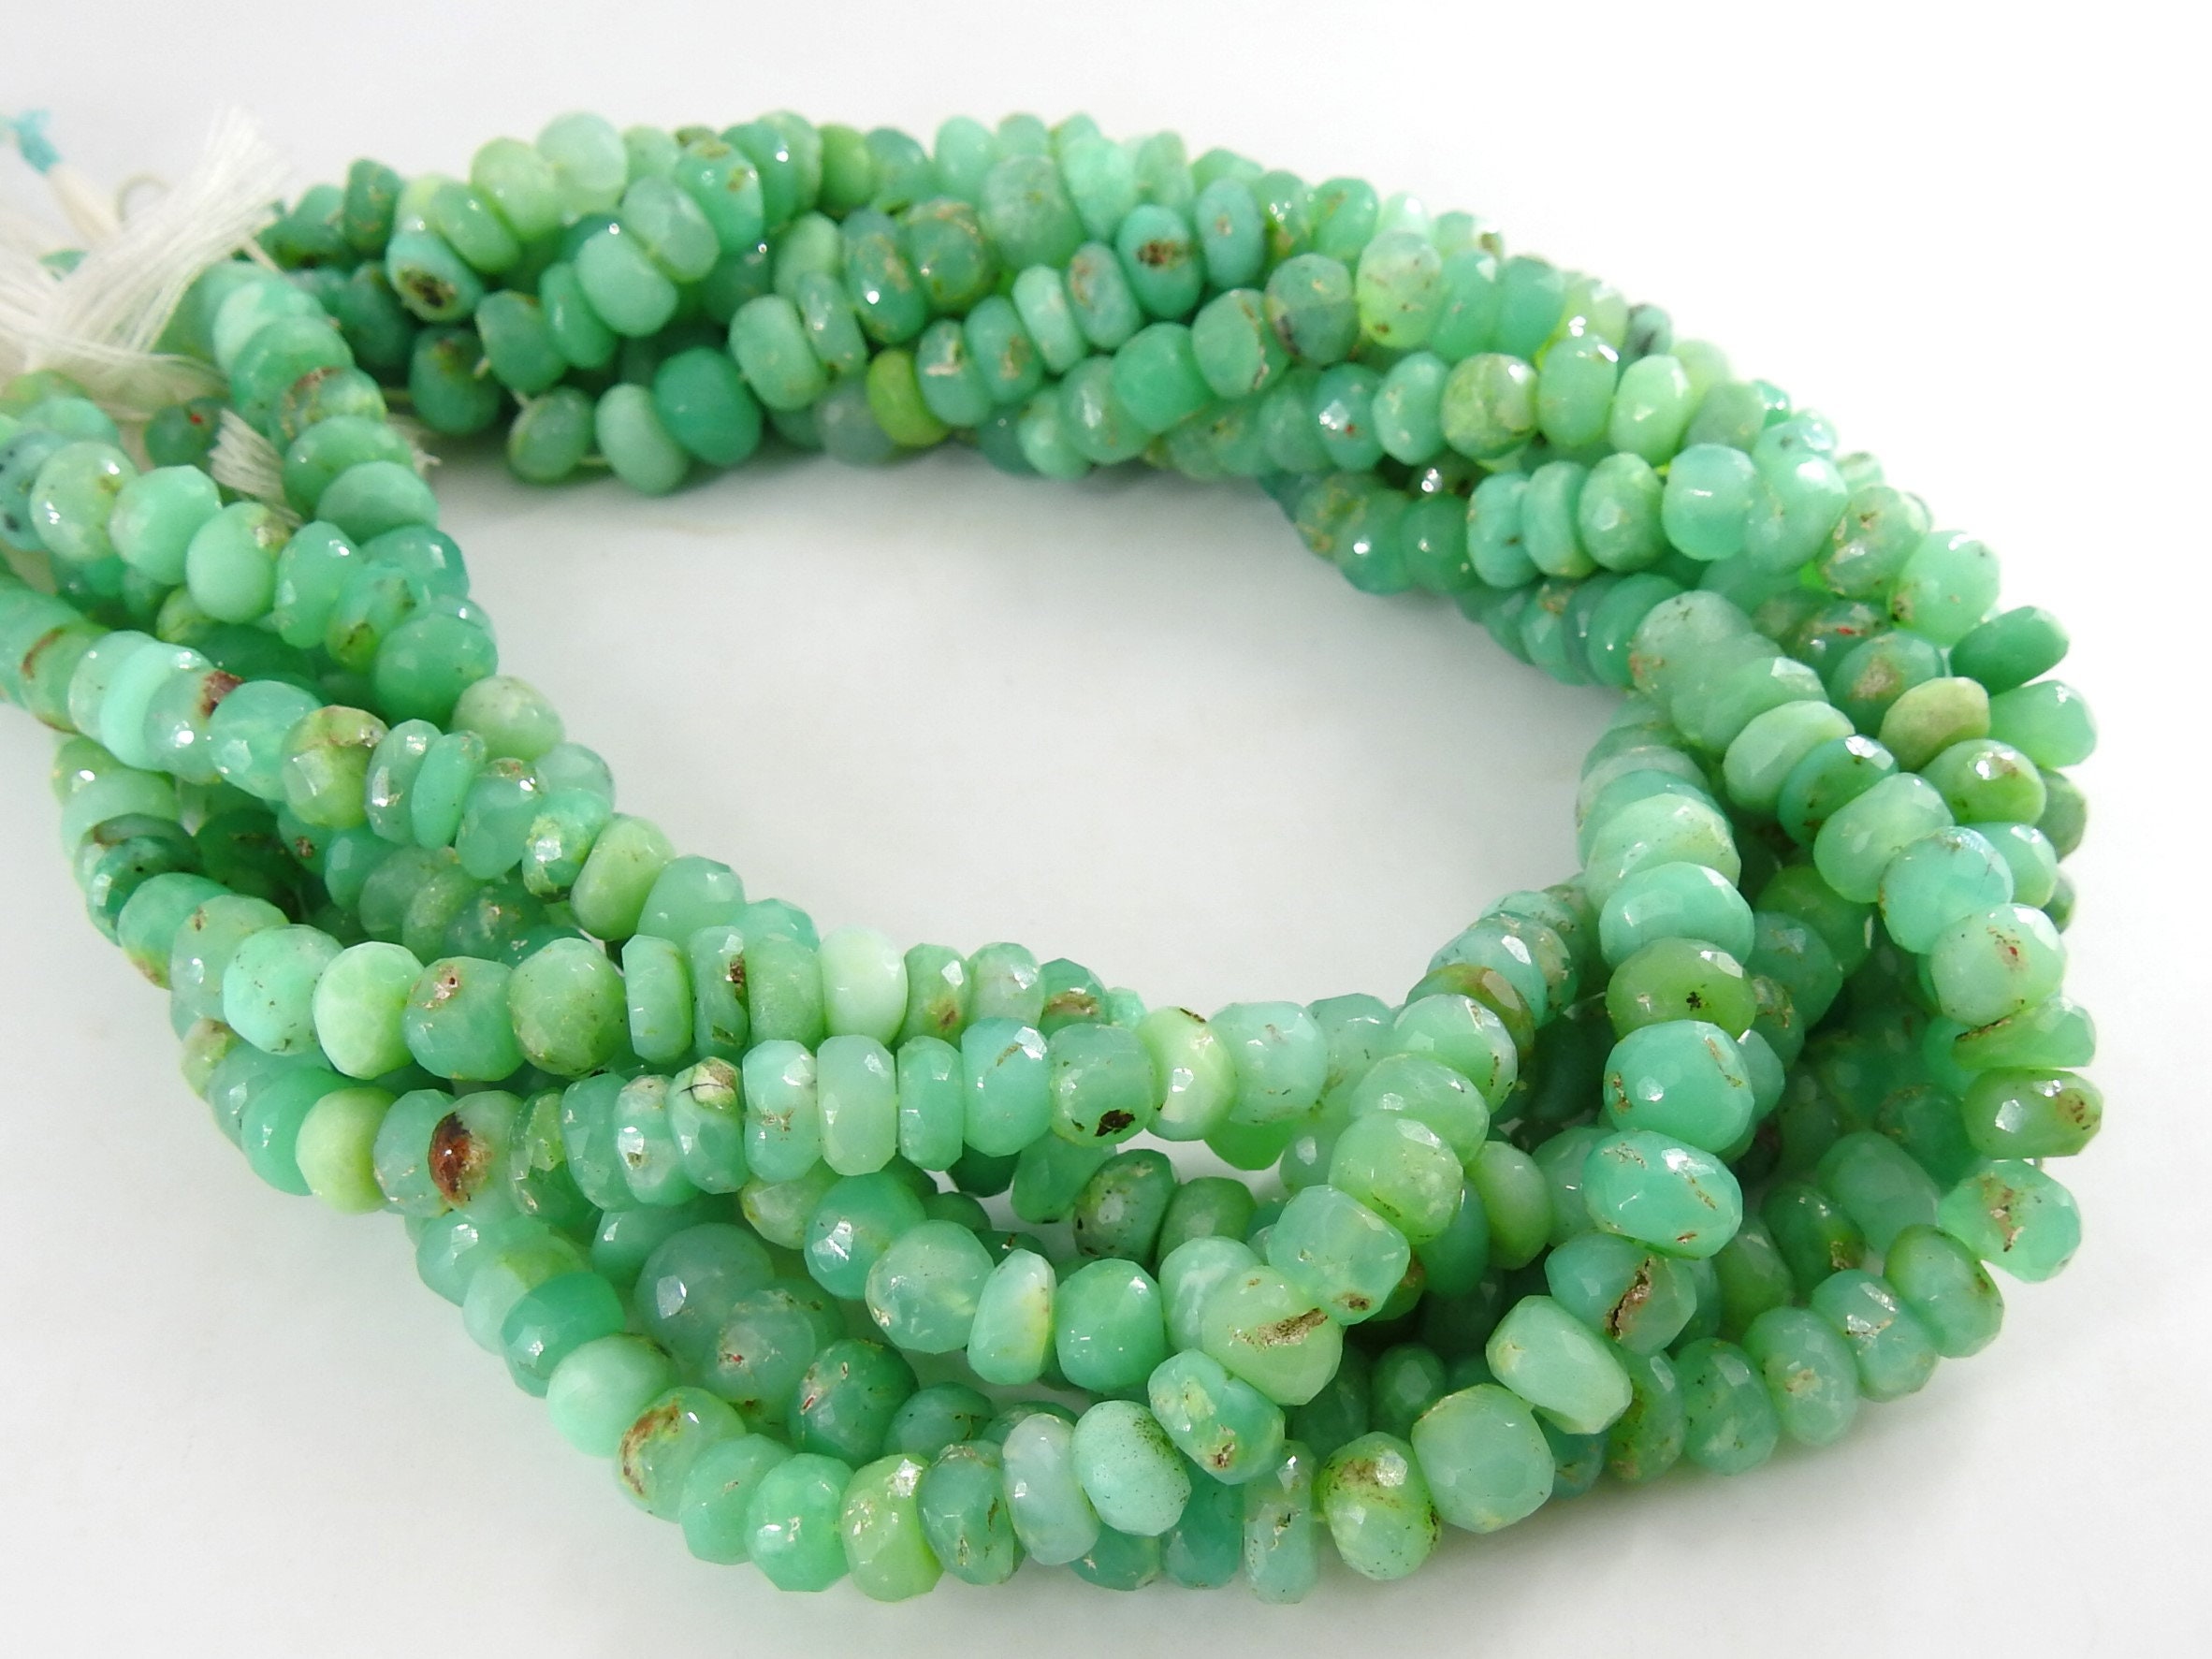 Chrysoprase Faceted Roundel Beads,Handmade,Loose Stone,For Making Jewelry,Necklace,Wholesaler,Supplies,13Inch 7X8MM,100%Natural PME-B4 | Save 33% - Rajasthan Living 12